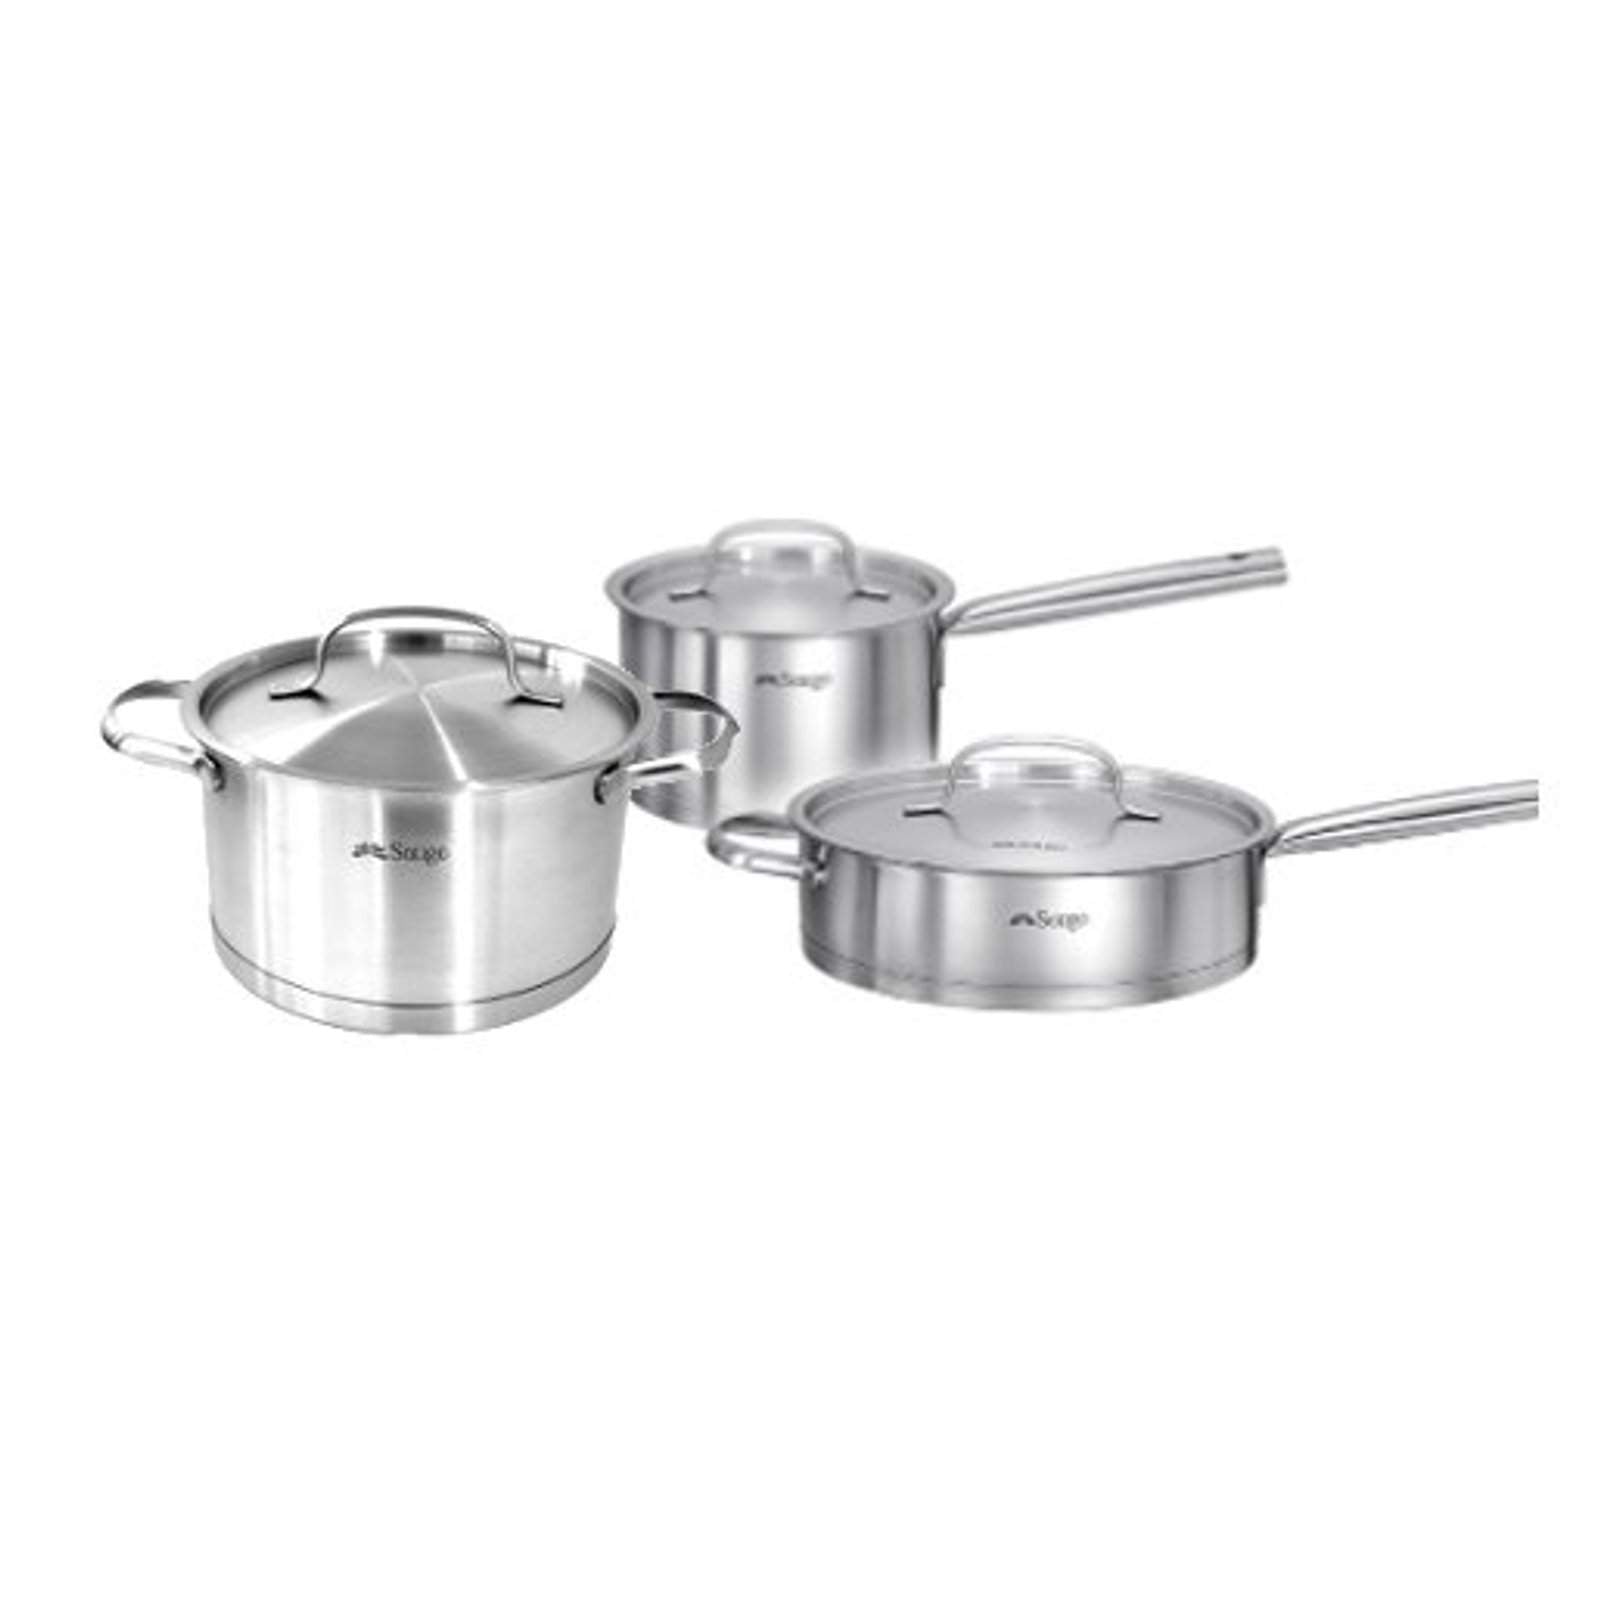 Induction Cookware Set - Stainless Steel Casserole, Saute Pan and Saucepan-Stainless Steel Cookware Set-Chef's Quality Cookware